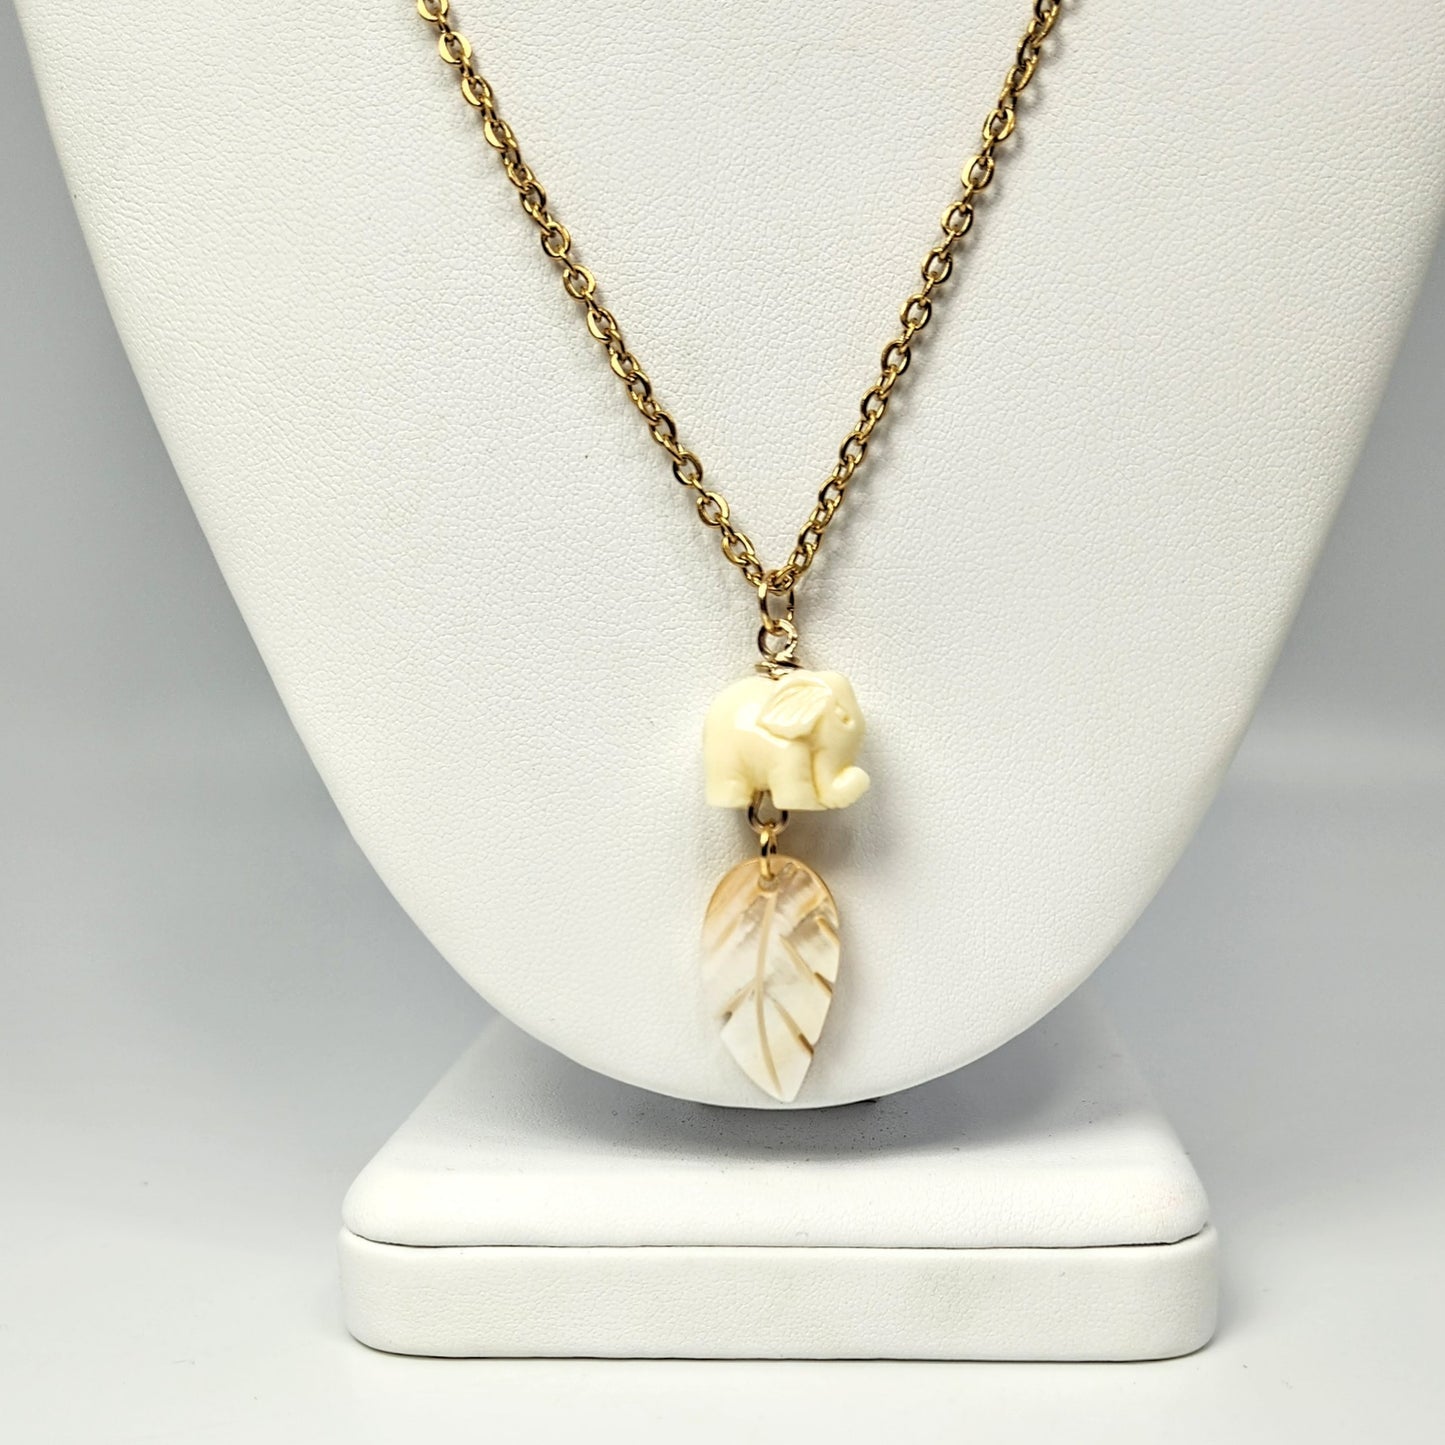 Elephant + Mother of Pearl Leaf Pendant Necklace